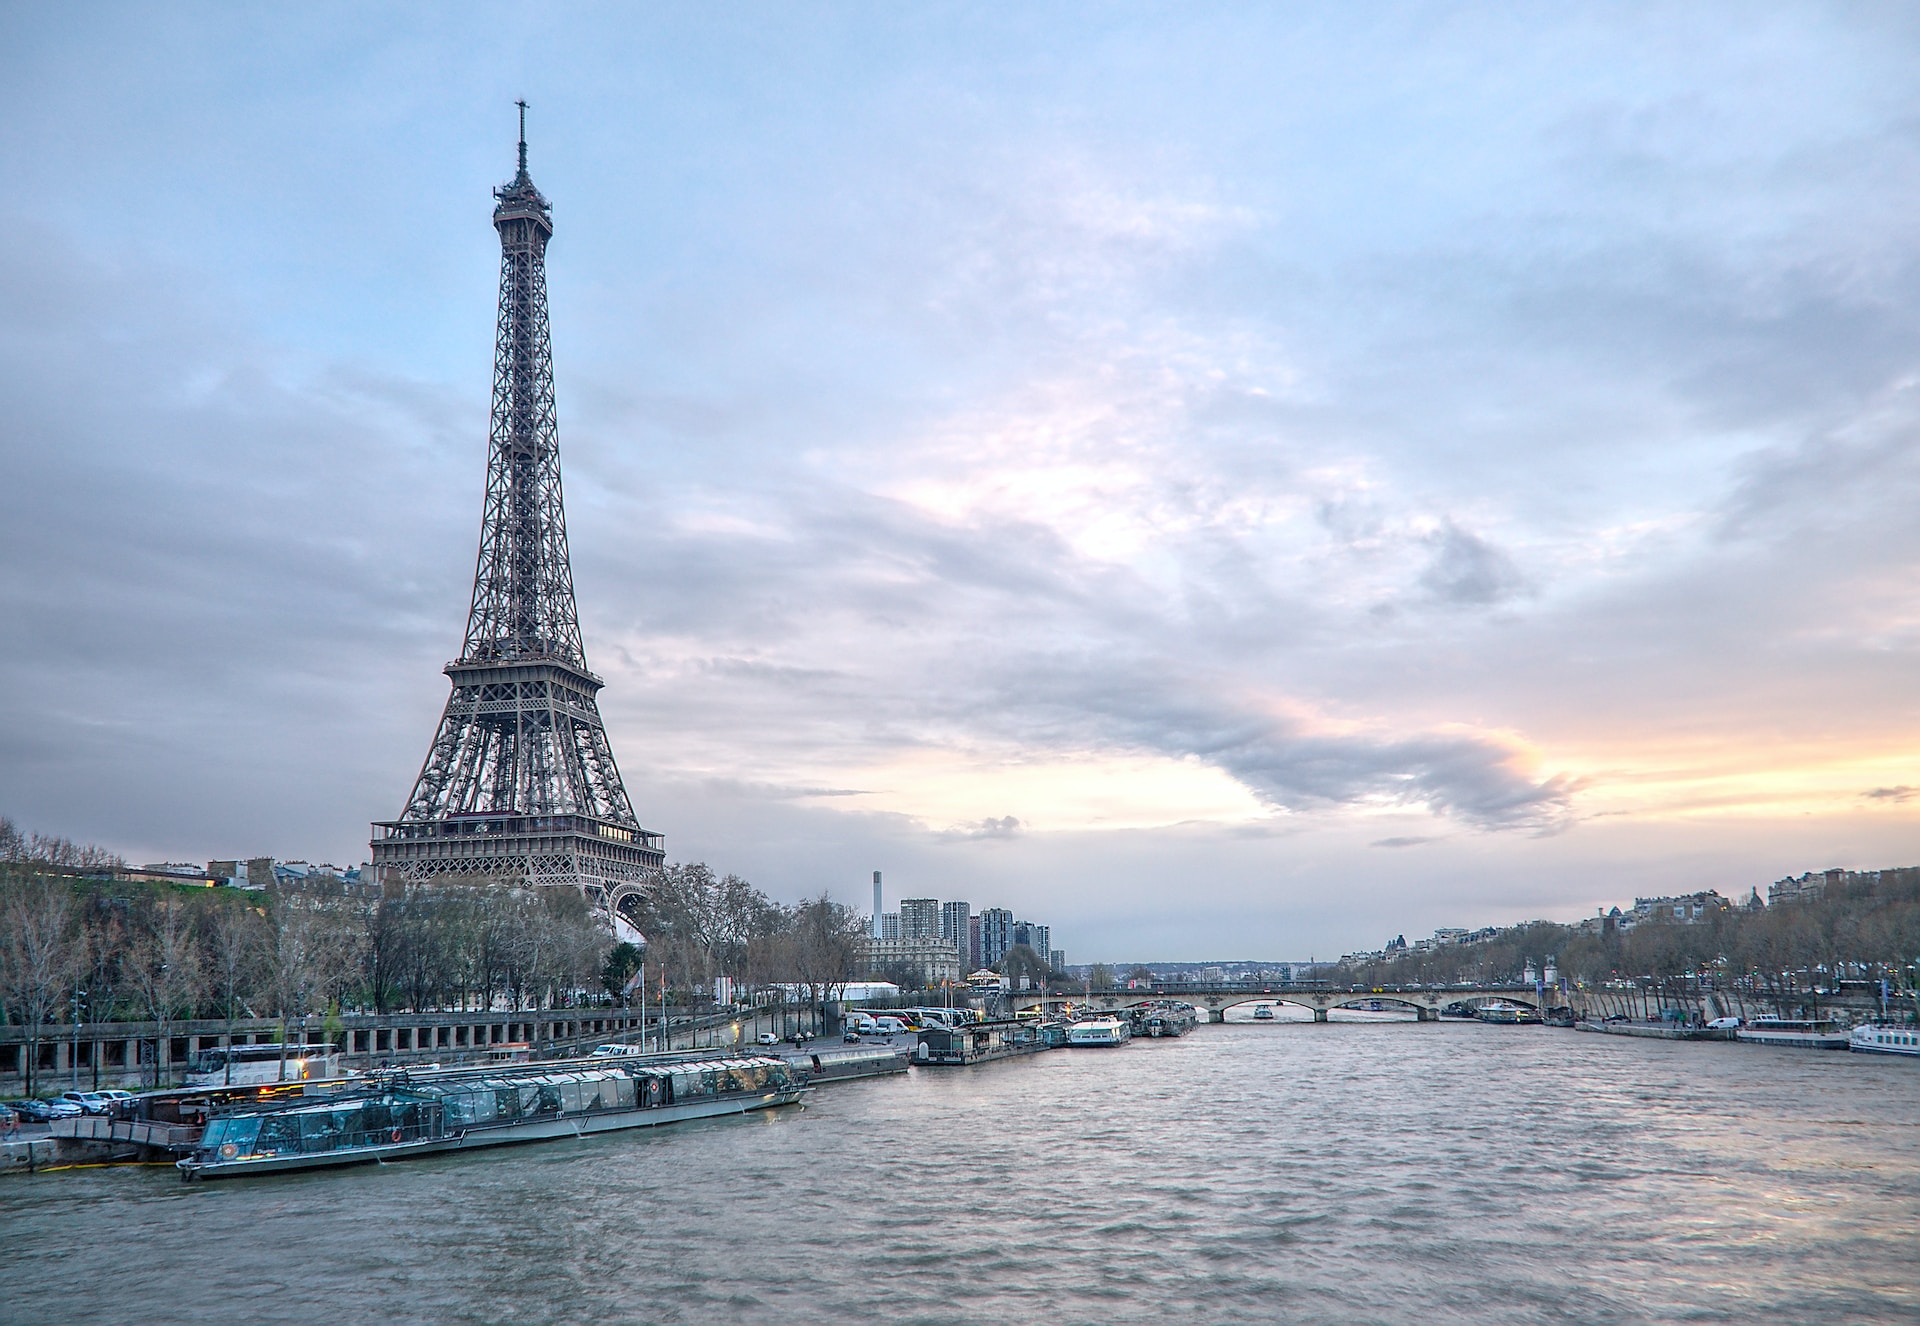 What Are the 11 Most Interesting Facts About the Eiffel Tower?